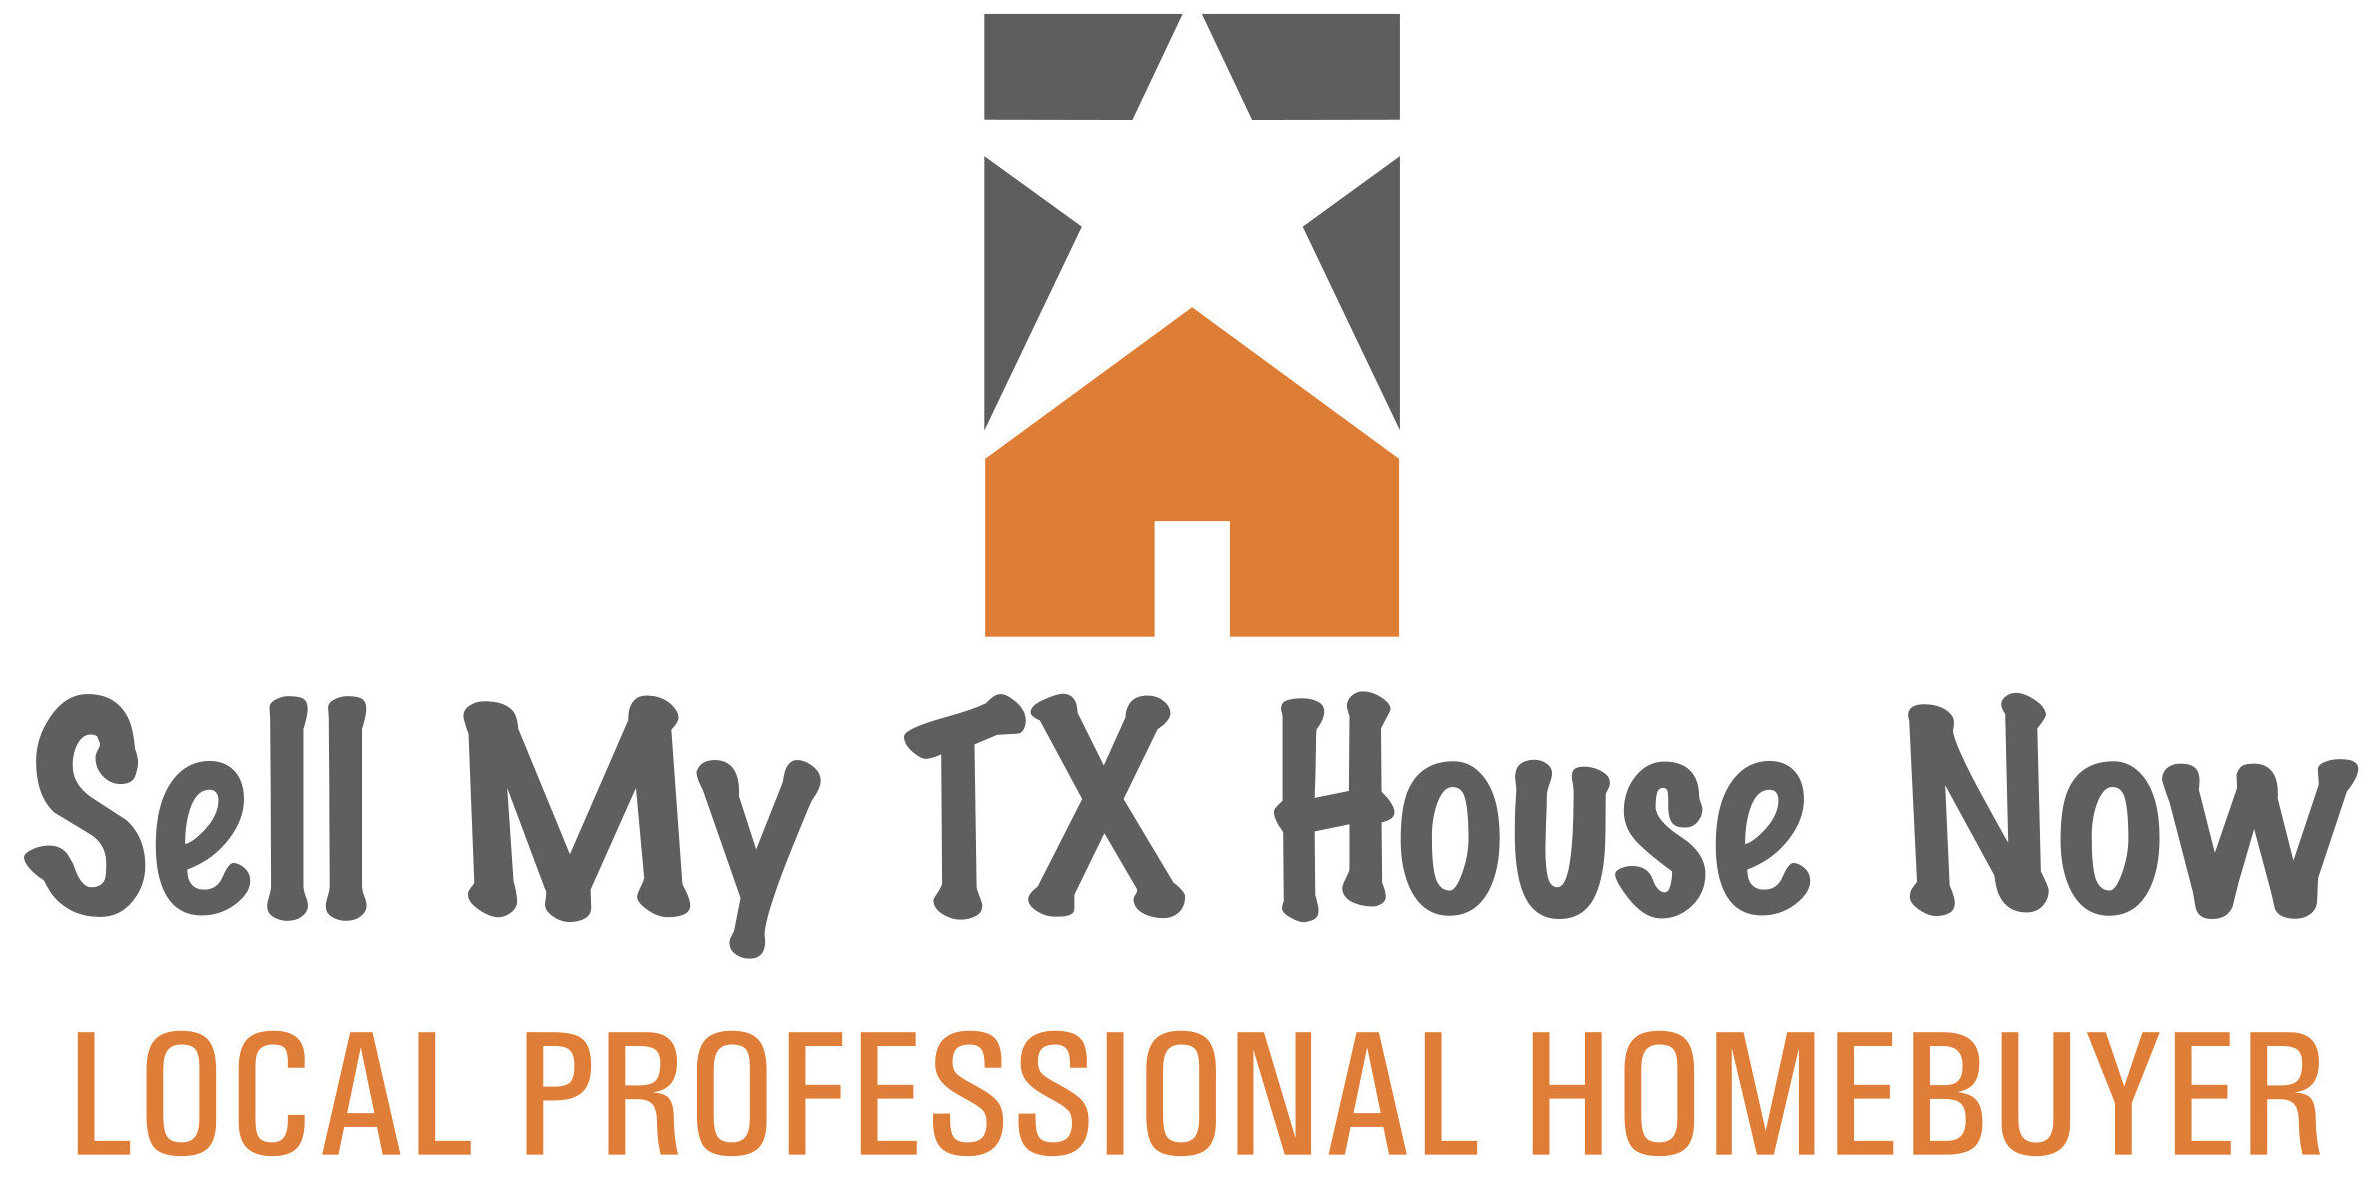 Sell My TX House Now logo